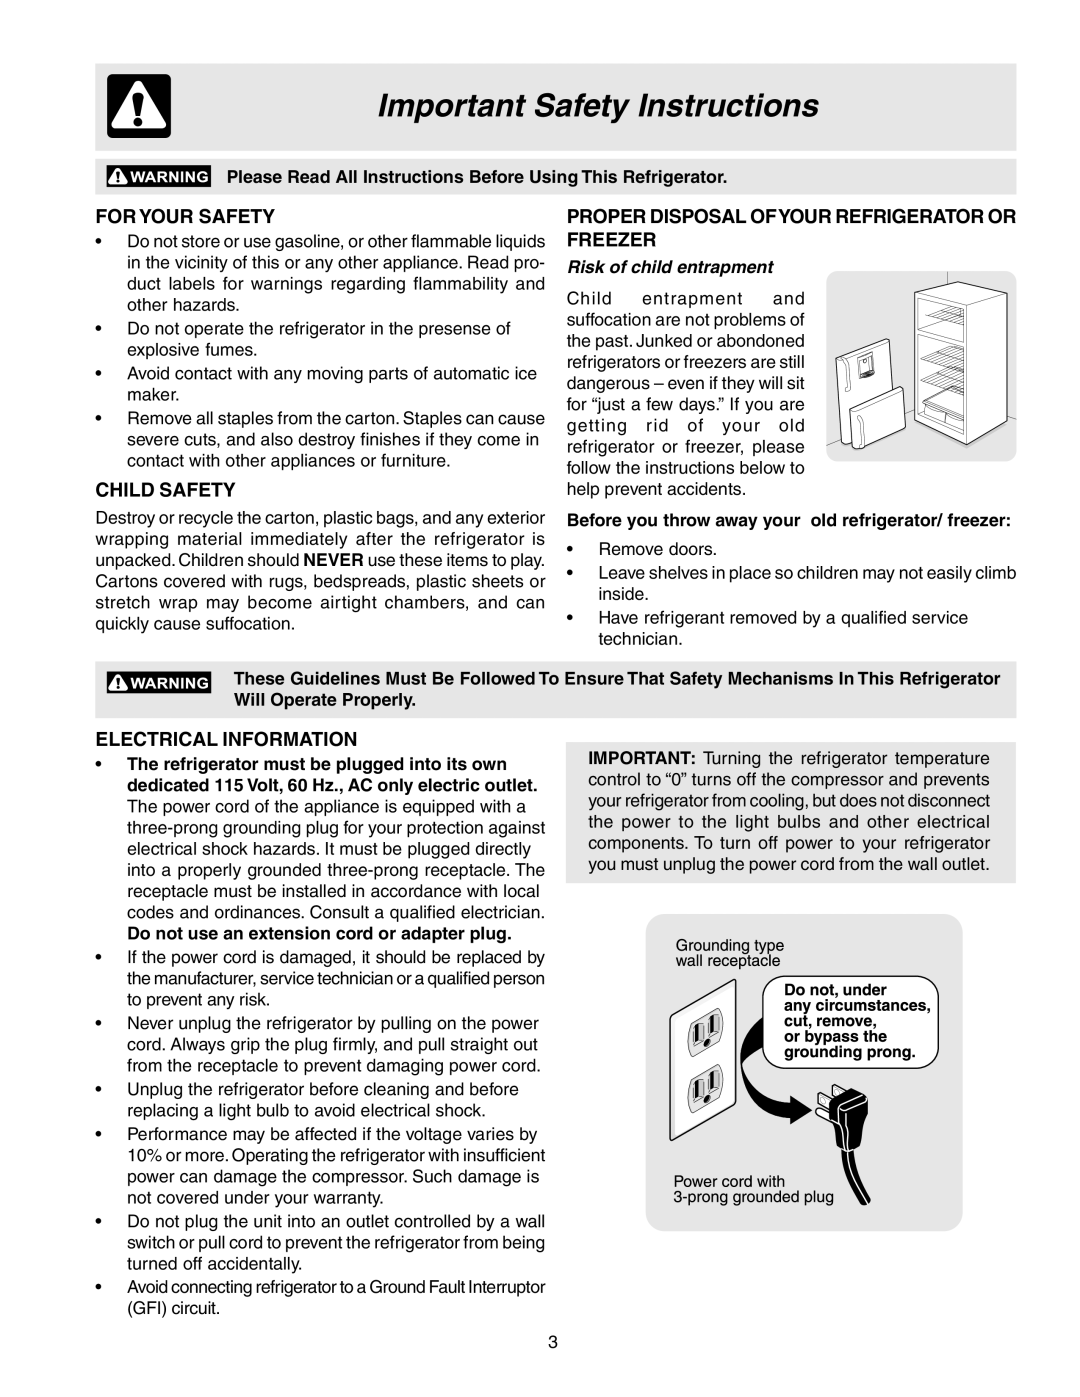 Frigidaire 241567600 warranty Important Safety Instructions, For Your Safety, Child Safety, Electrical Information 